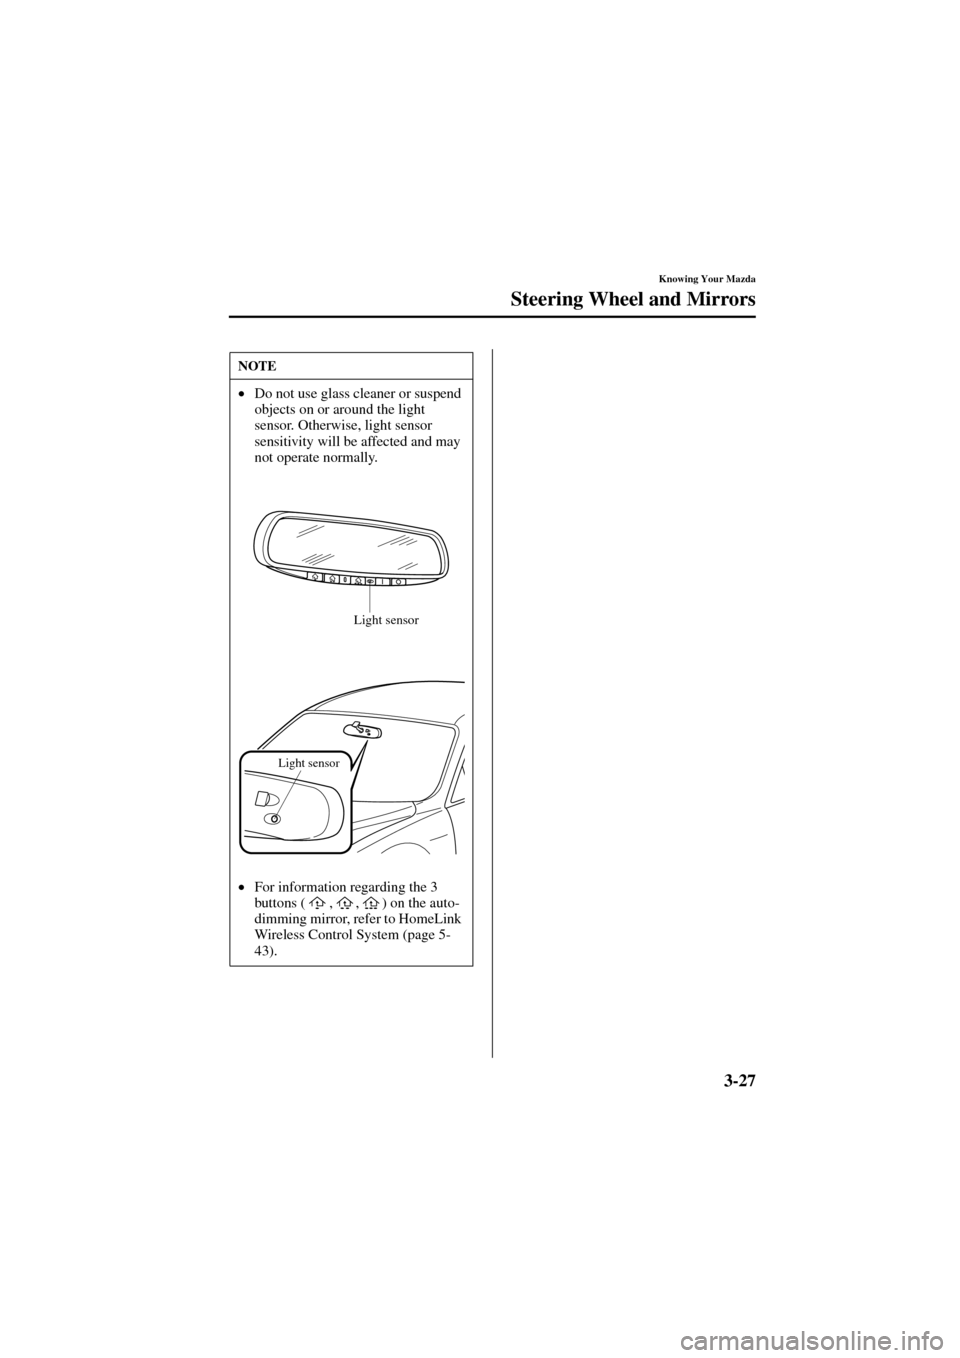 MAZDA MODEL 6 2004  Owners Manual (in English) 3-27
Knowing Your Mazda
Steering Wheel and Mirrors
Form No. 8R29-EA-02I
NOTE
•
Do not use glass cleaner or suspend 
objects on or around the light 
sensor. Otherwise, light sensor 
sensitivity will 